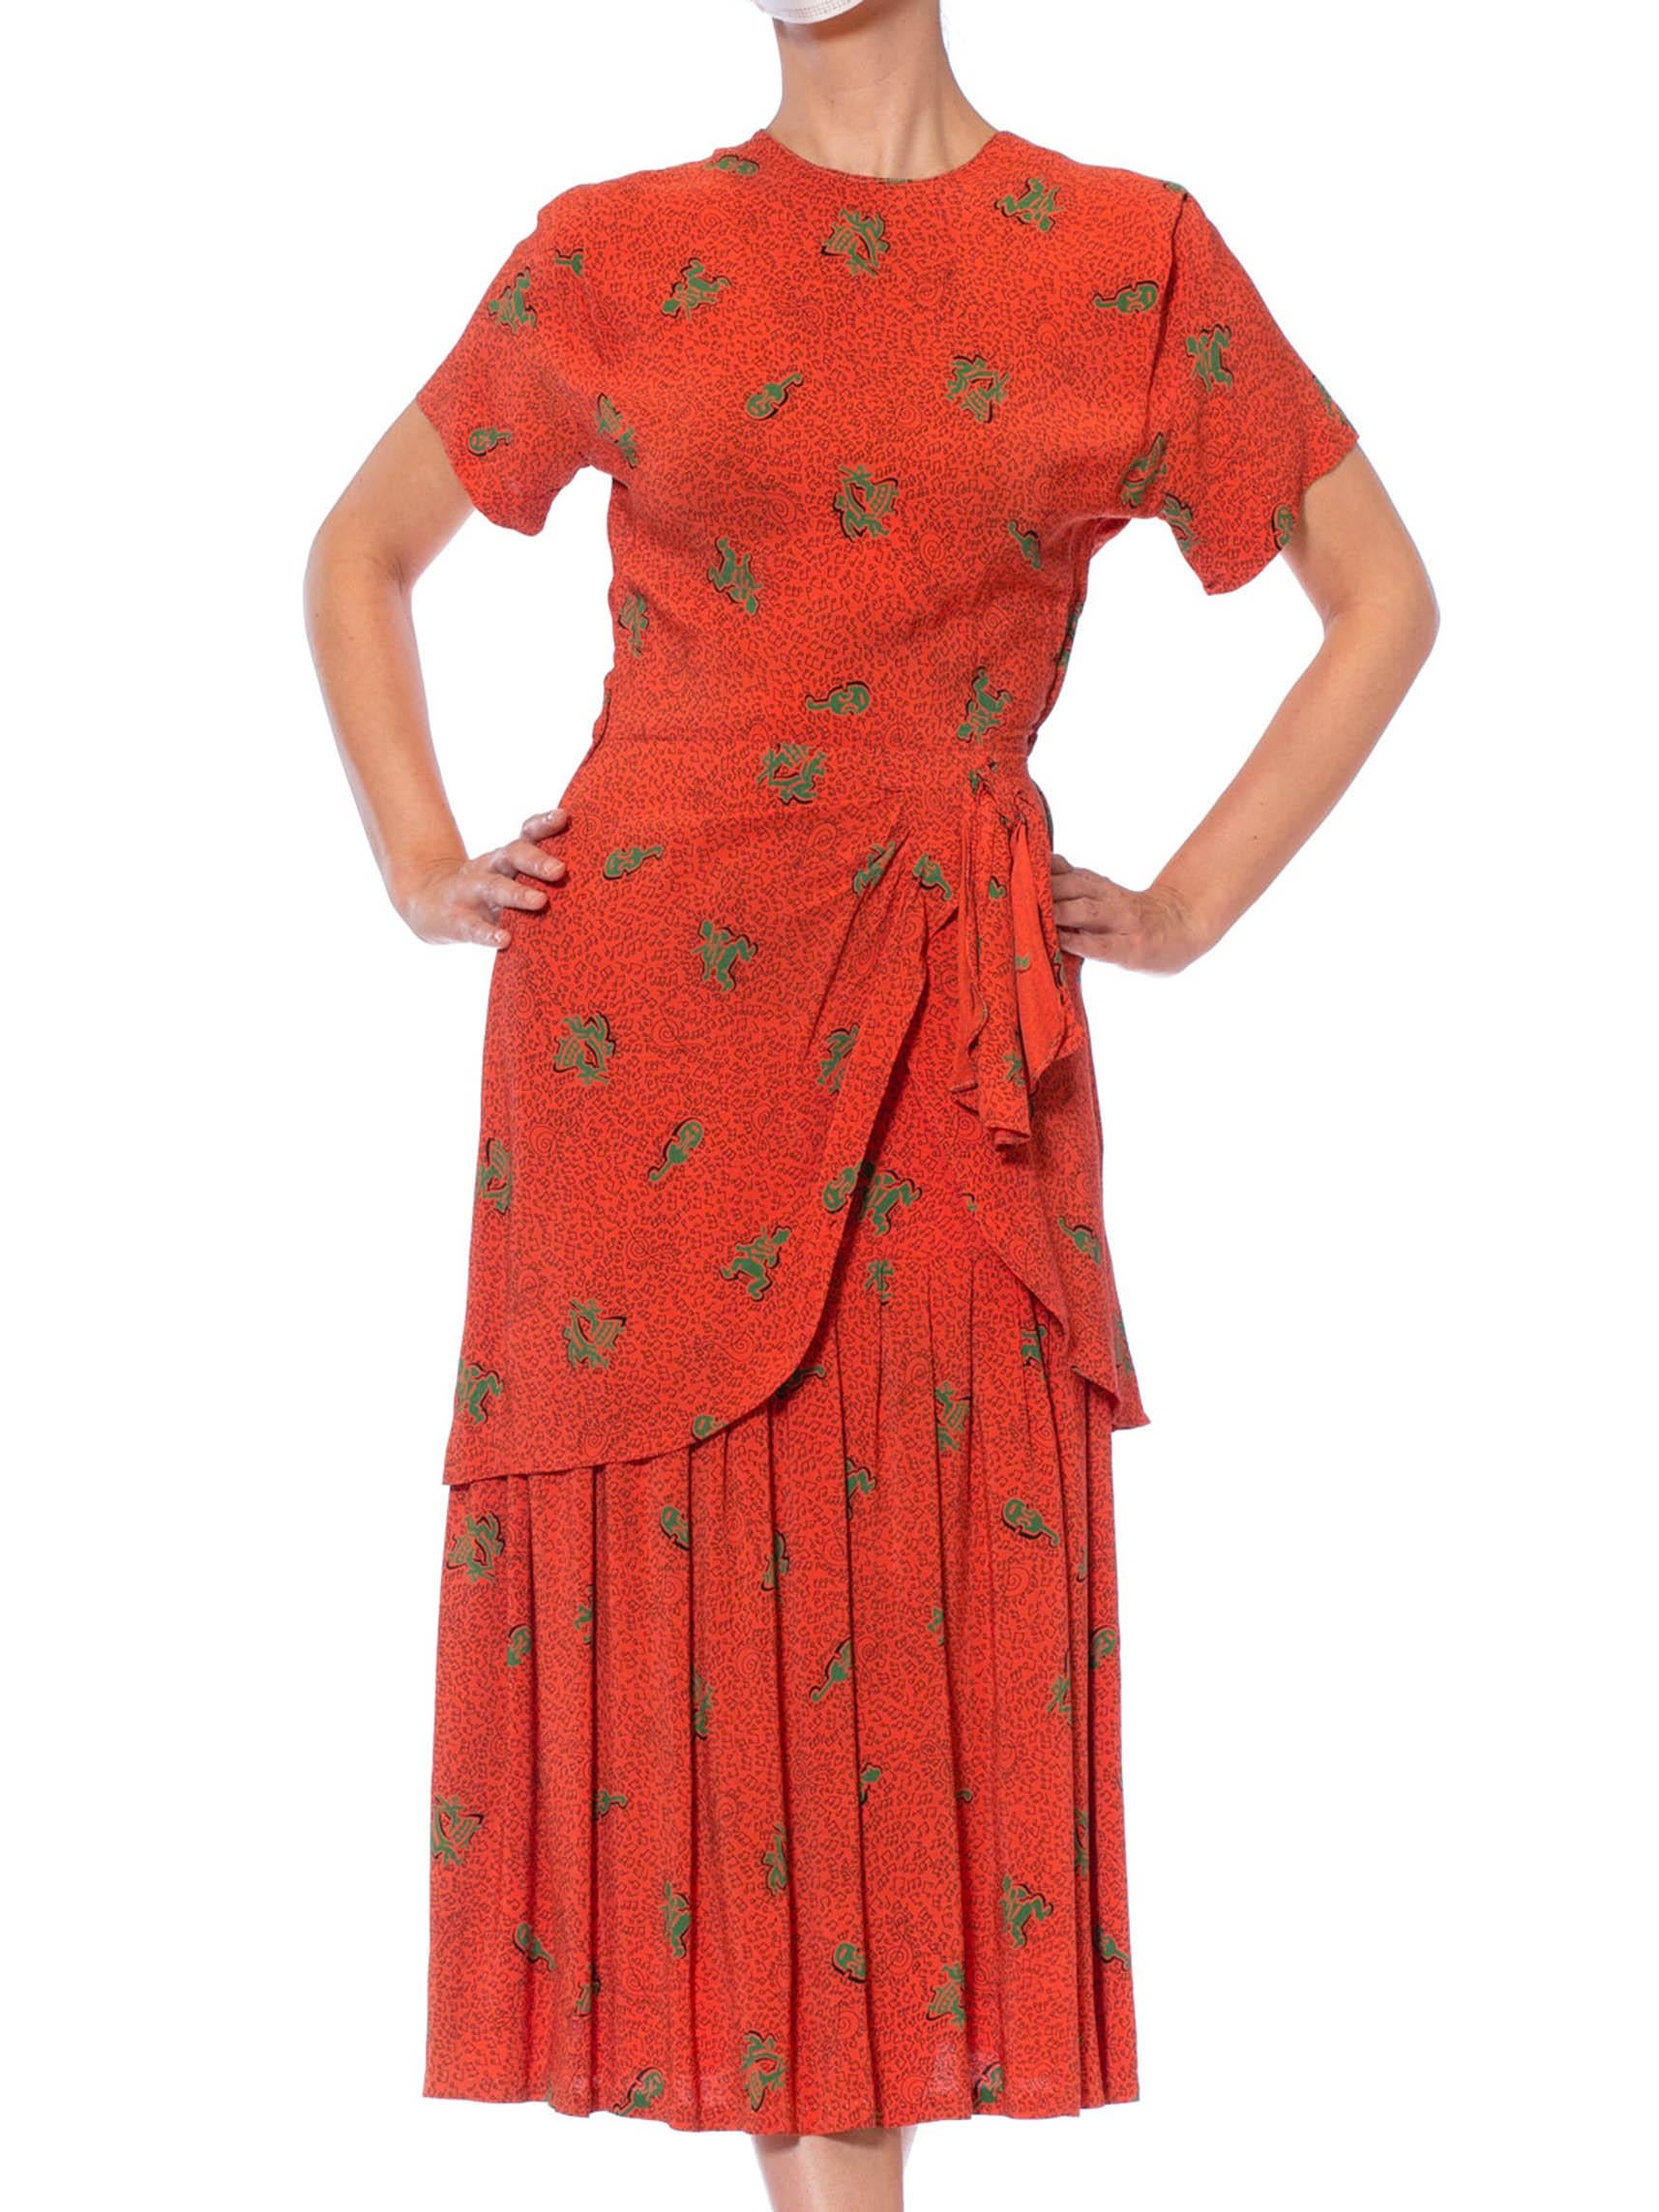 1940'S LORA LENOX Persimmon Red Rayon Crepe Rockabilly Lindy Hop Swing Dancer M For Sale 4